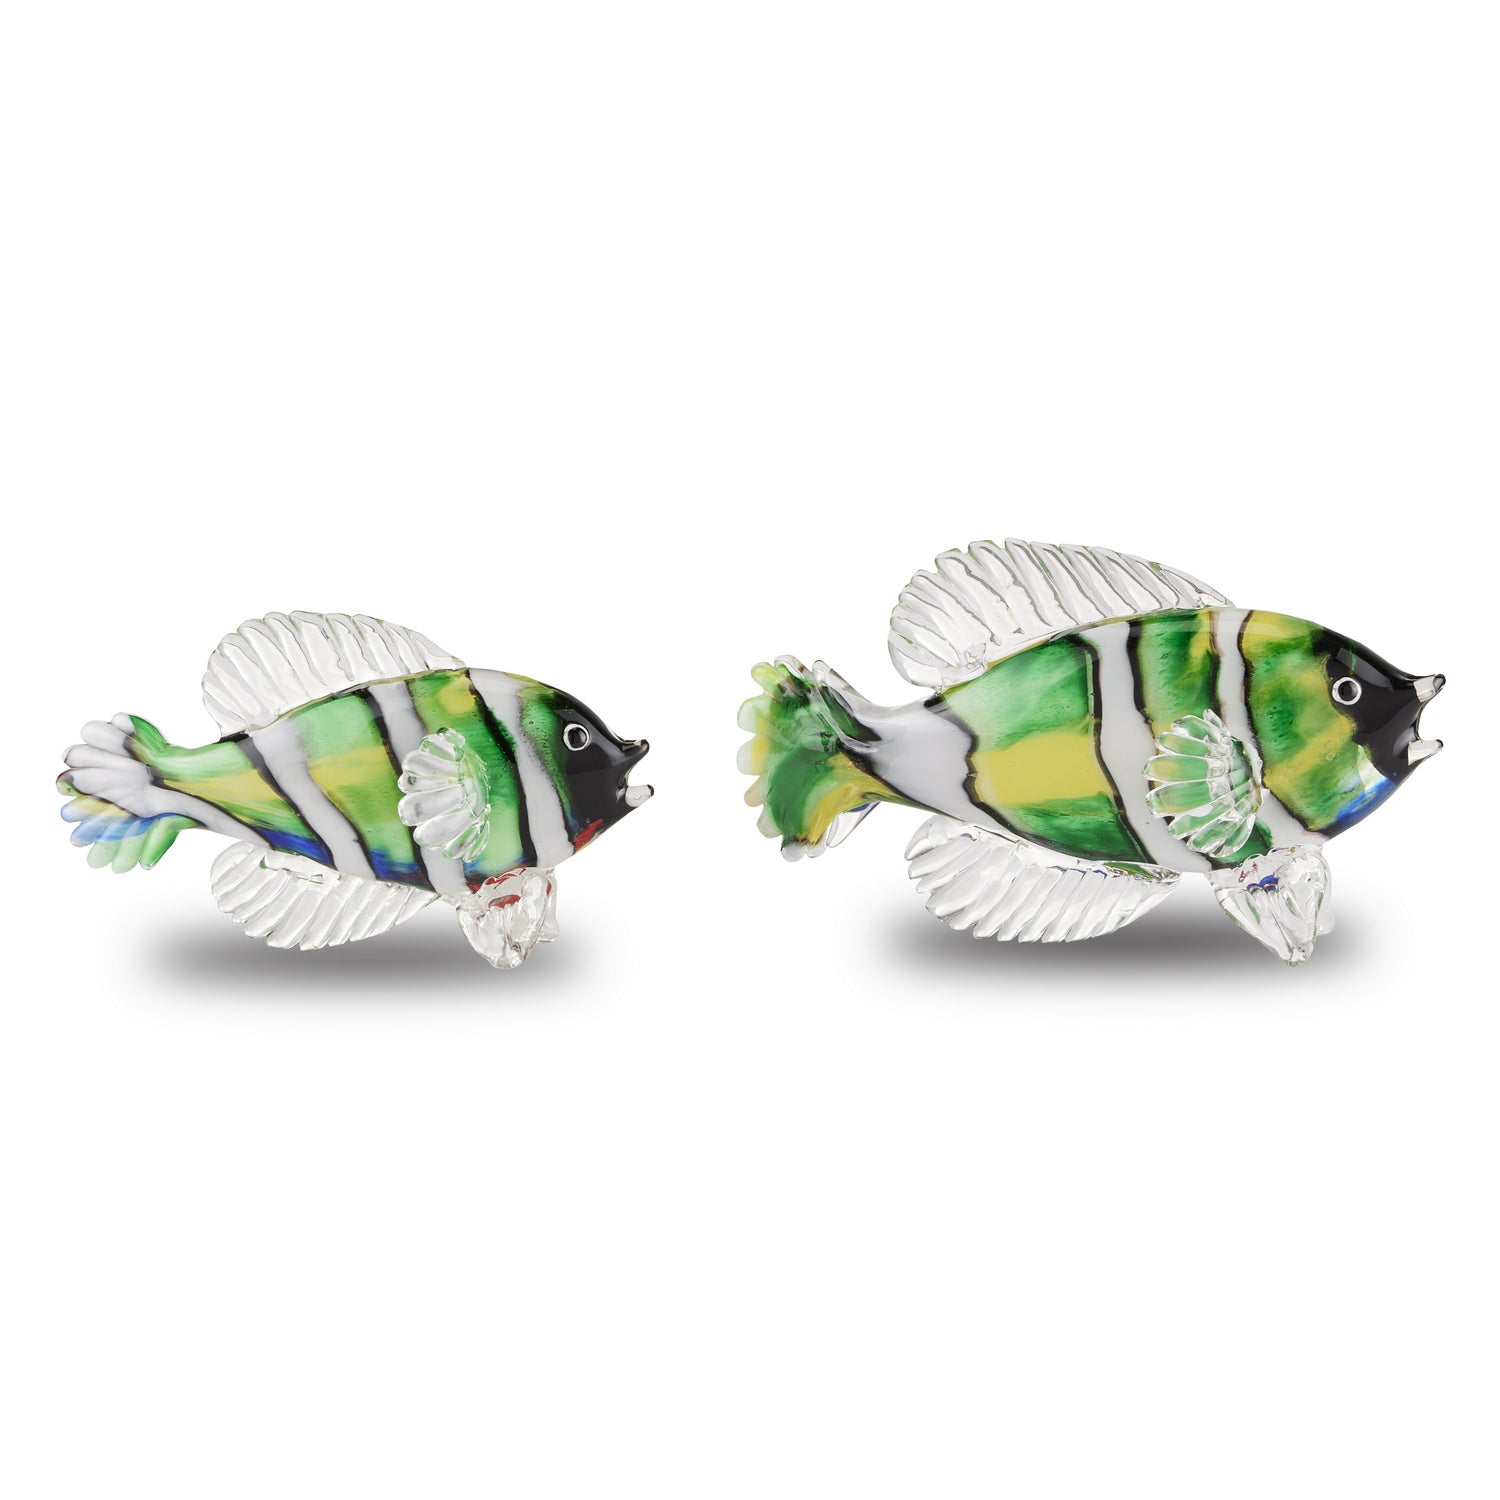 Fish Set of 2 from the Rialto collection in Green/Black/White/Multicolor finish